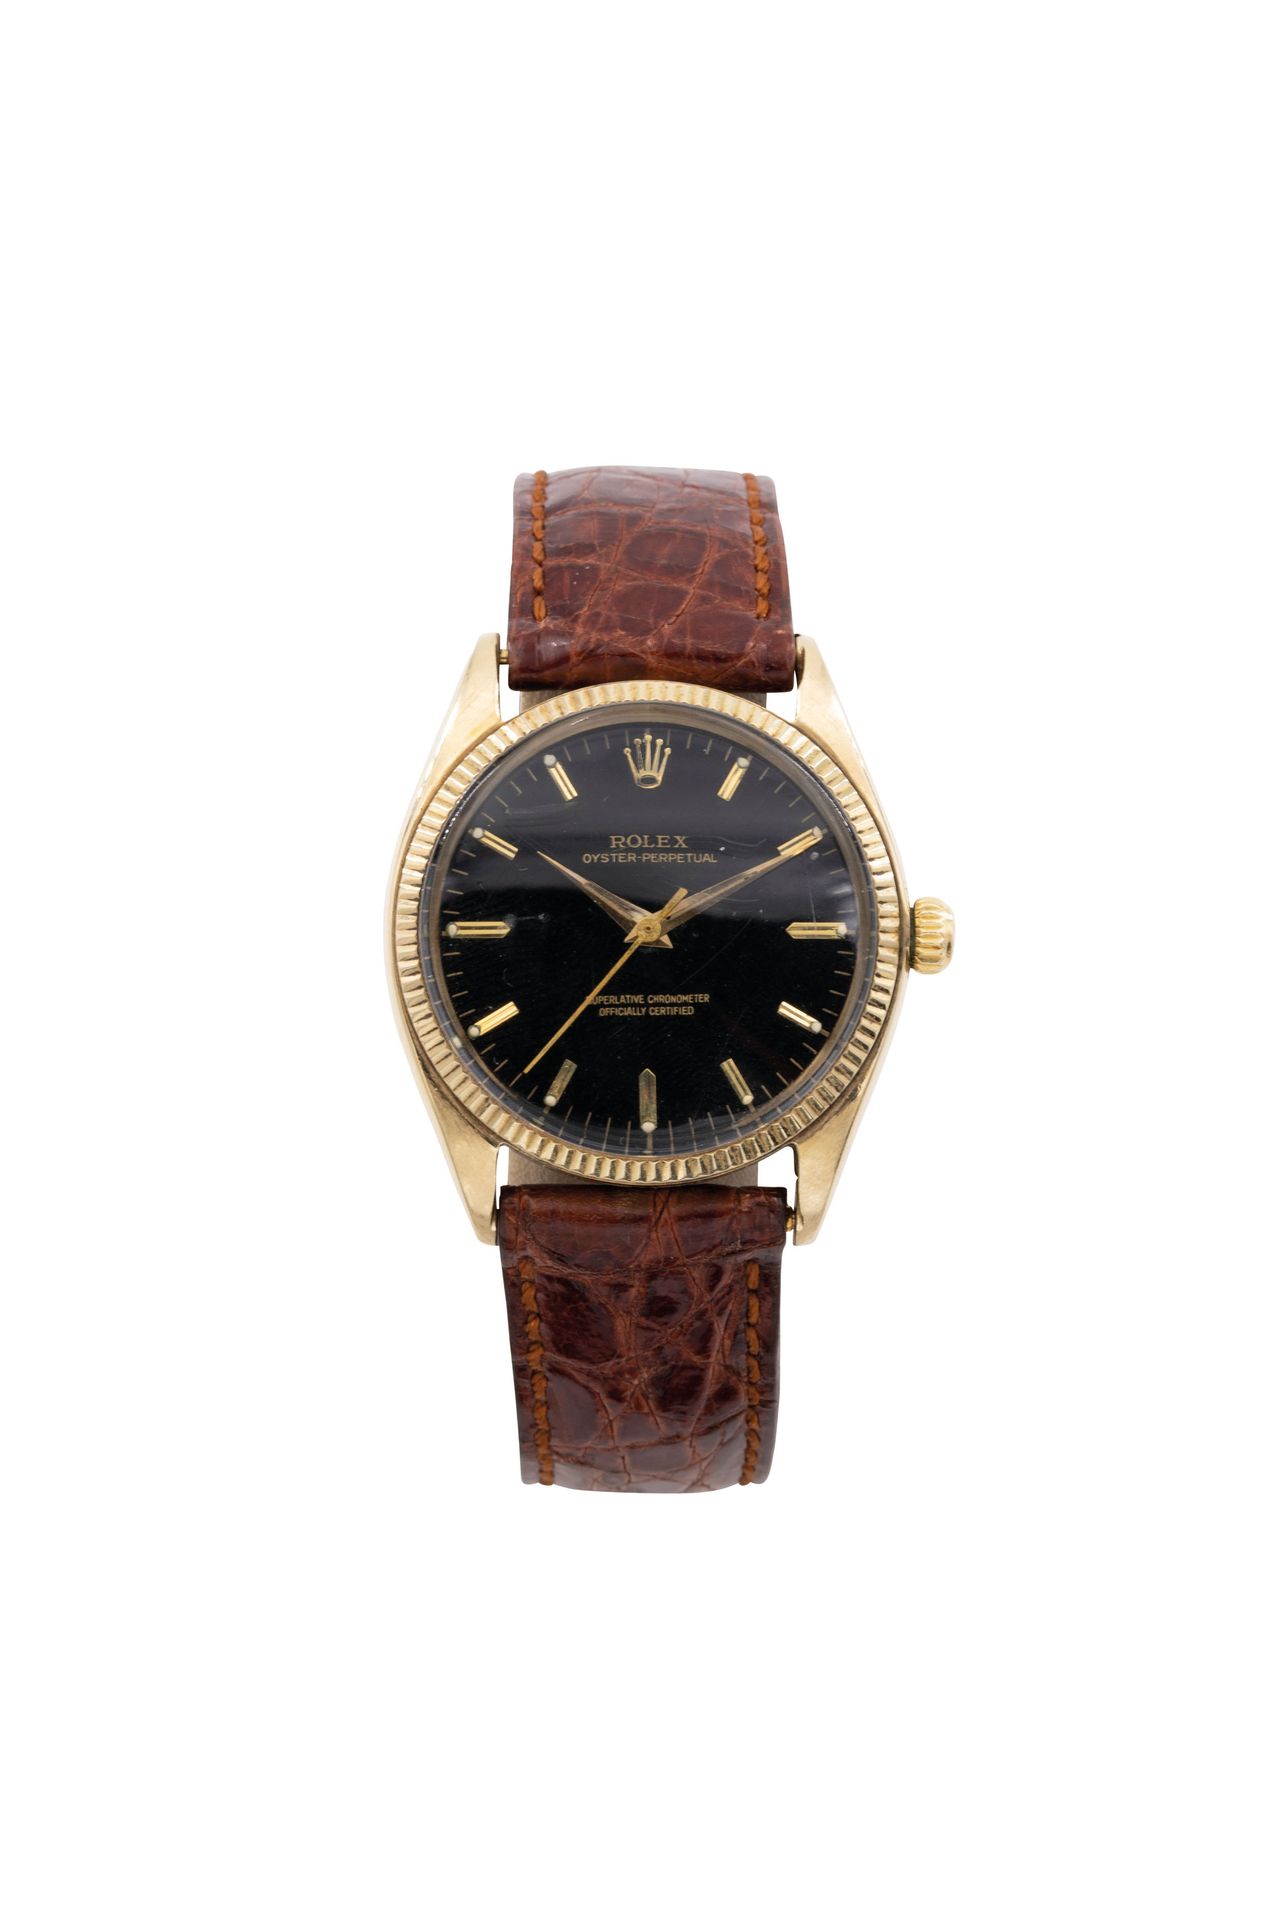 ROLEX OYSTER PERPETUAL, RÈF 1005, OR JAUNE - Vers 1961 Gehäuse in 18k Gold, Durc&hellip;